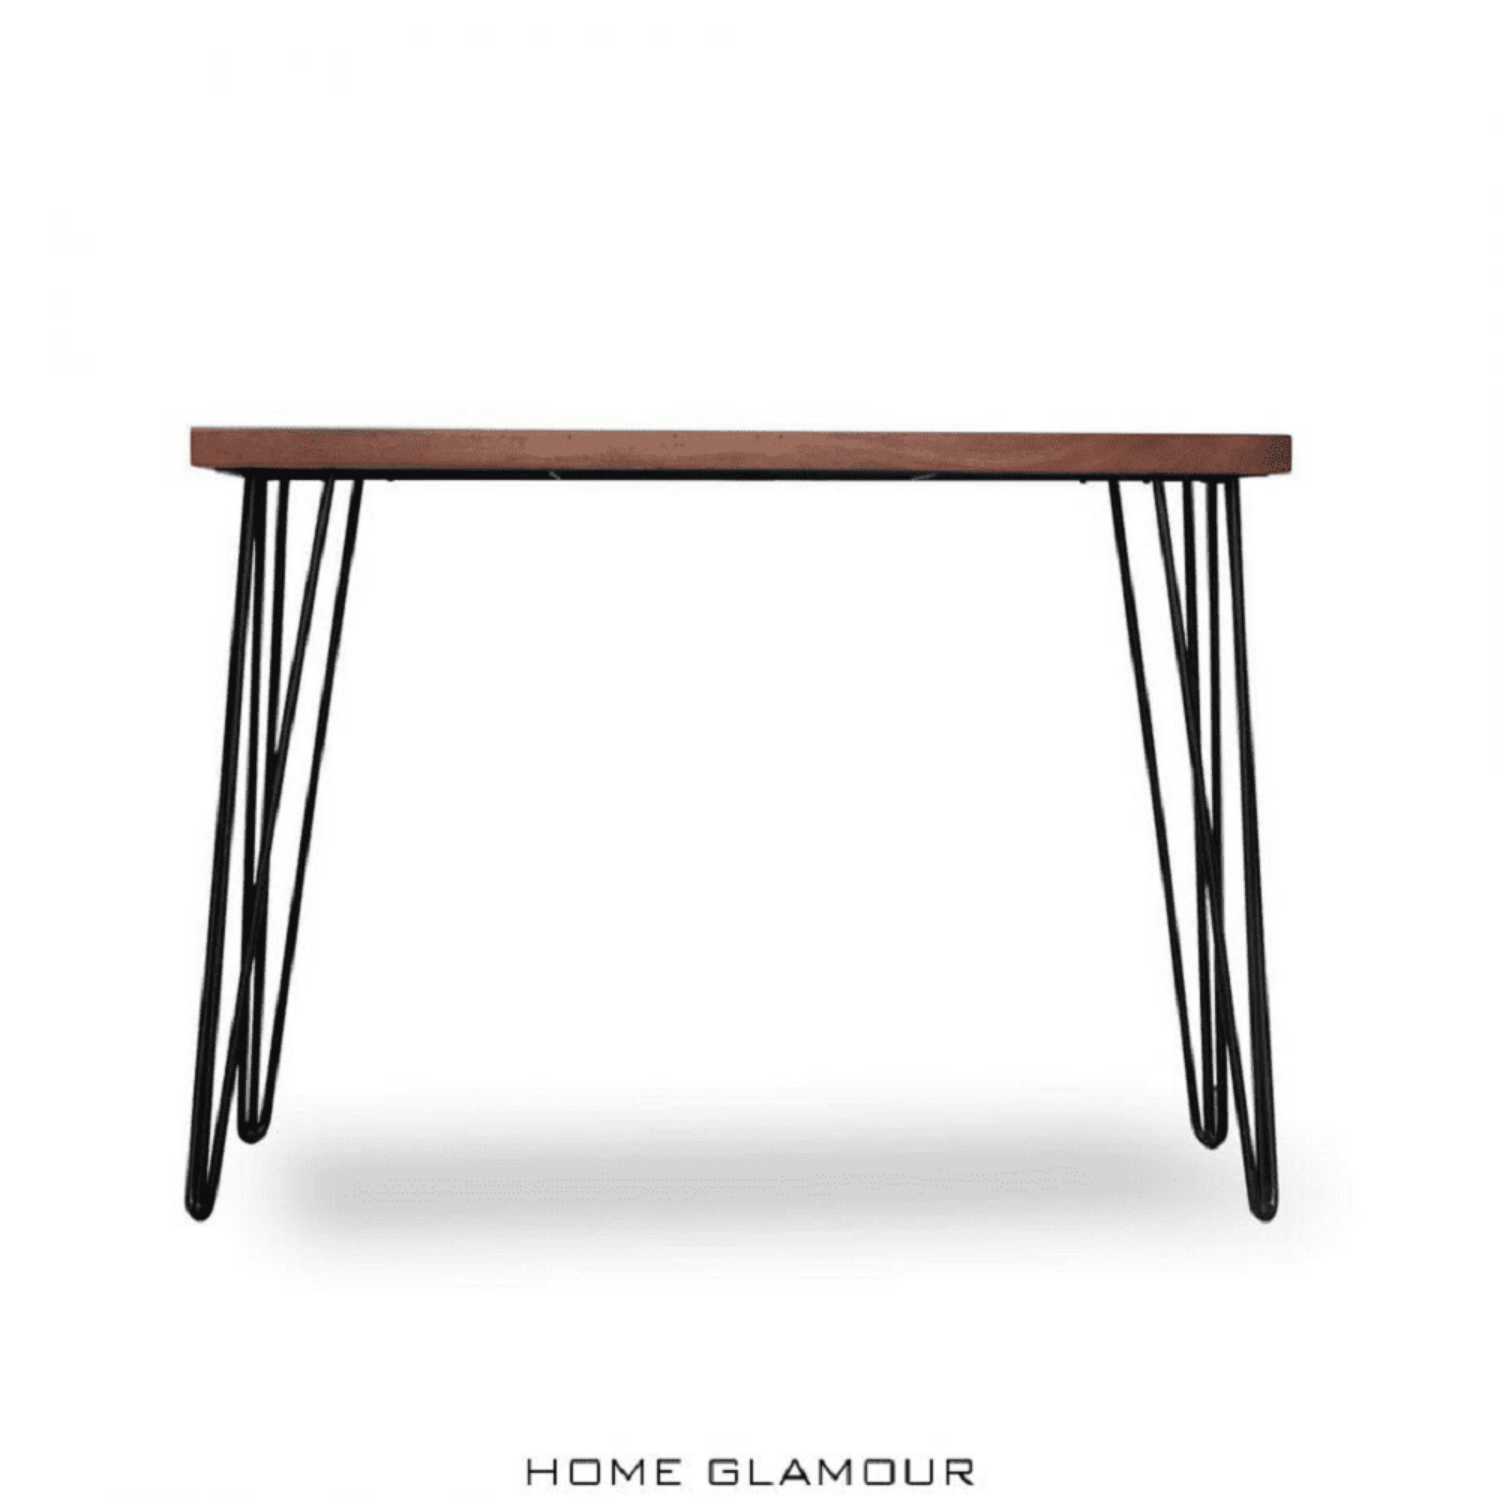 Hairpin wooden console table with metal legs